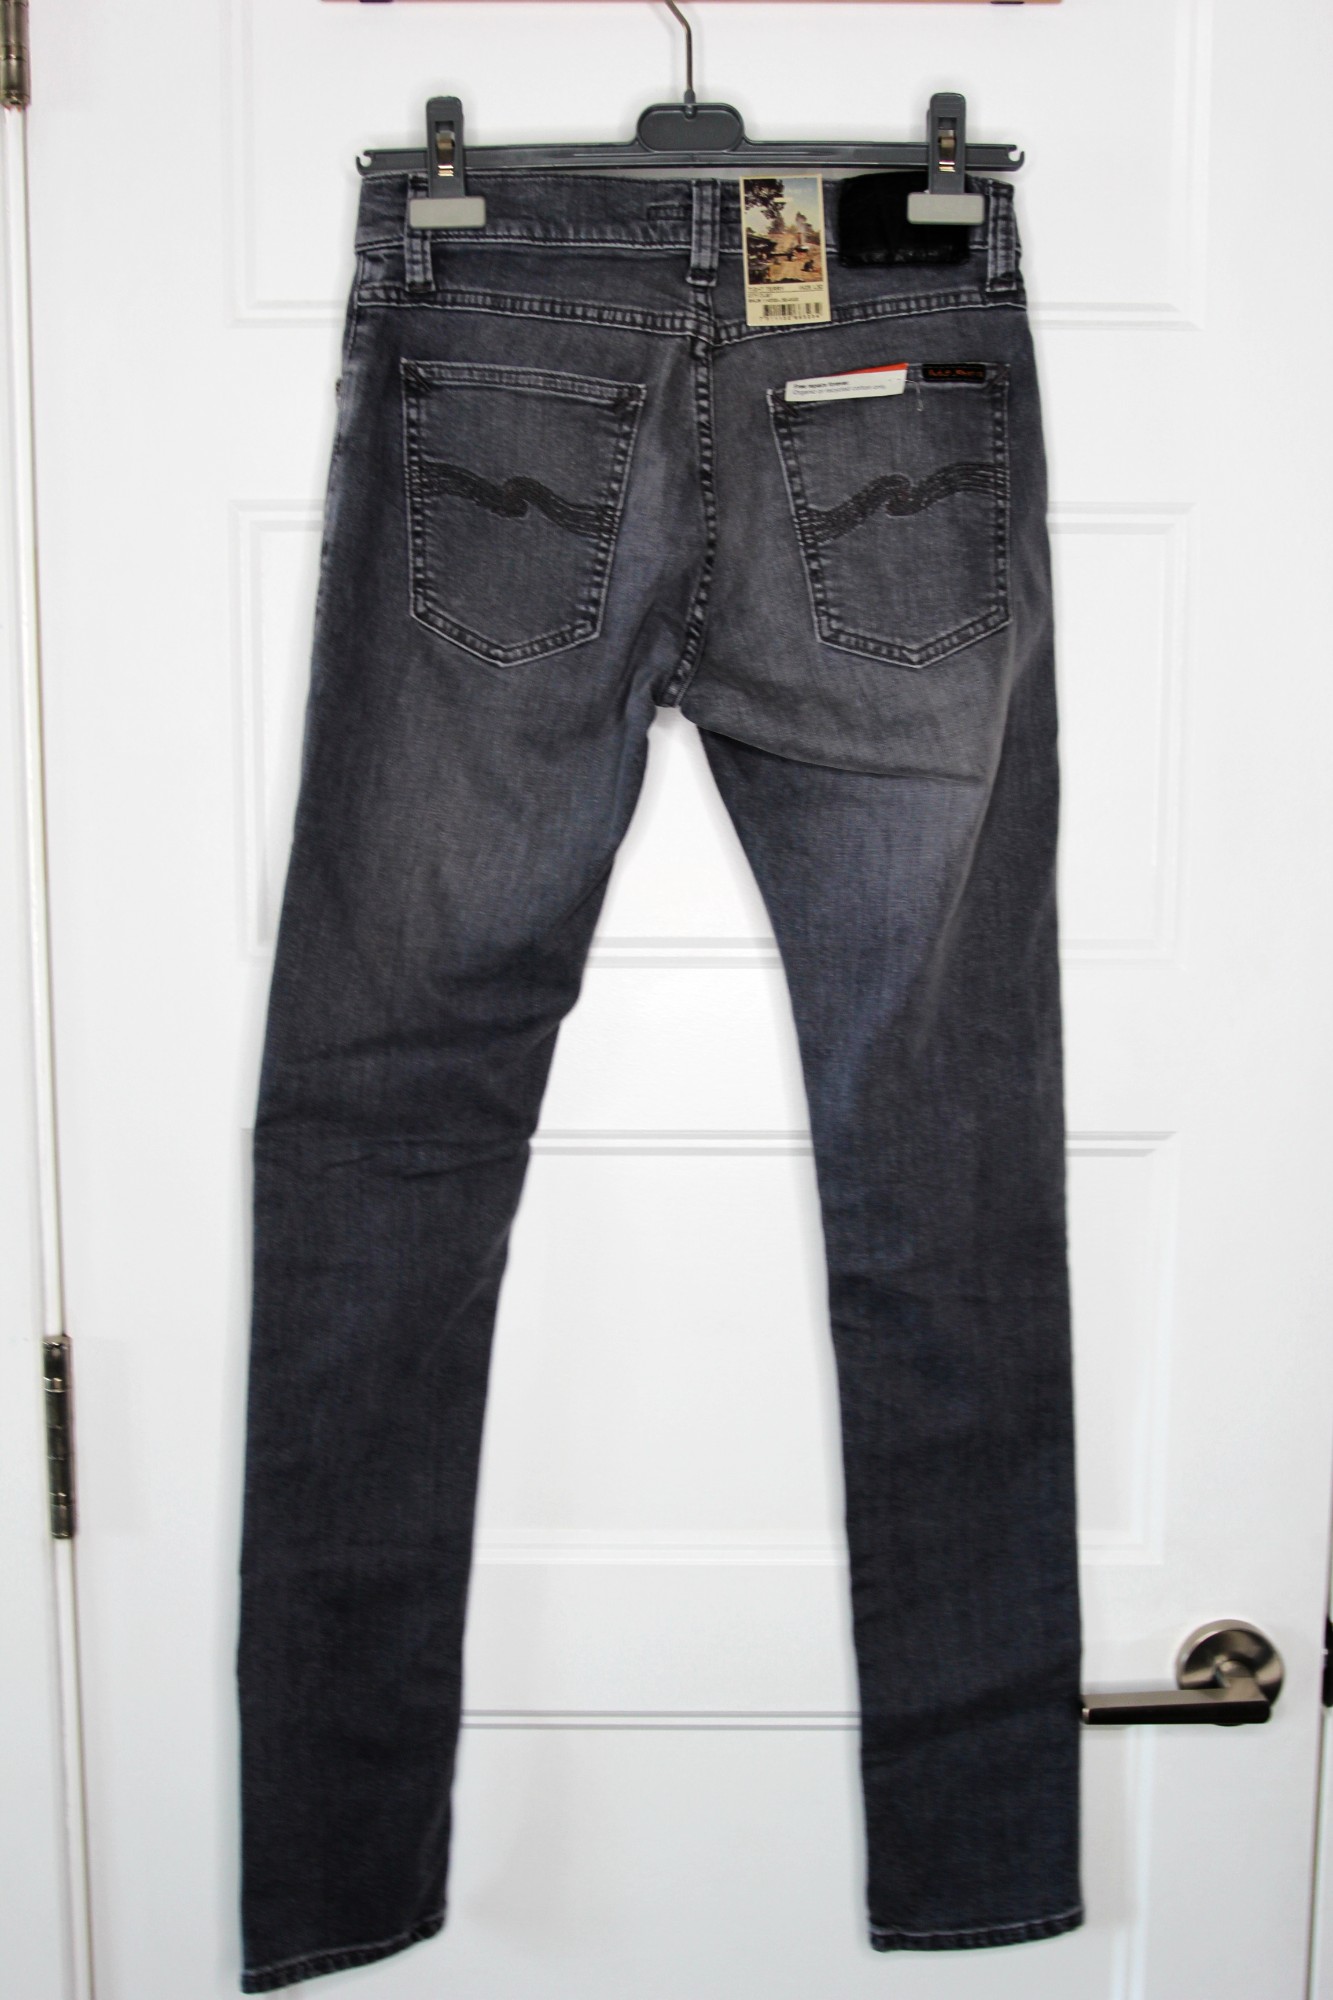 BNWT SS23 NUDIE JEANS TIGHT TERRY 28 x 32 - 4